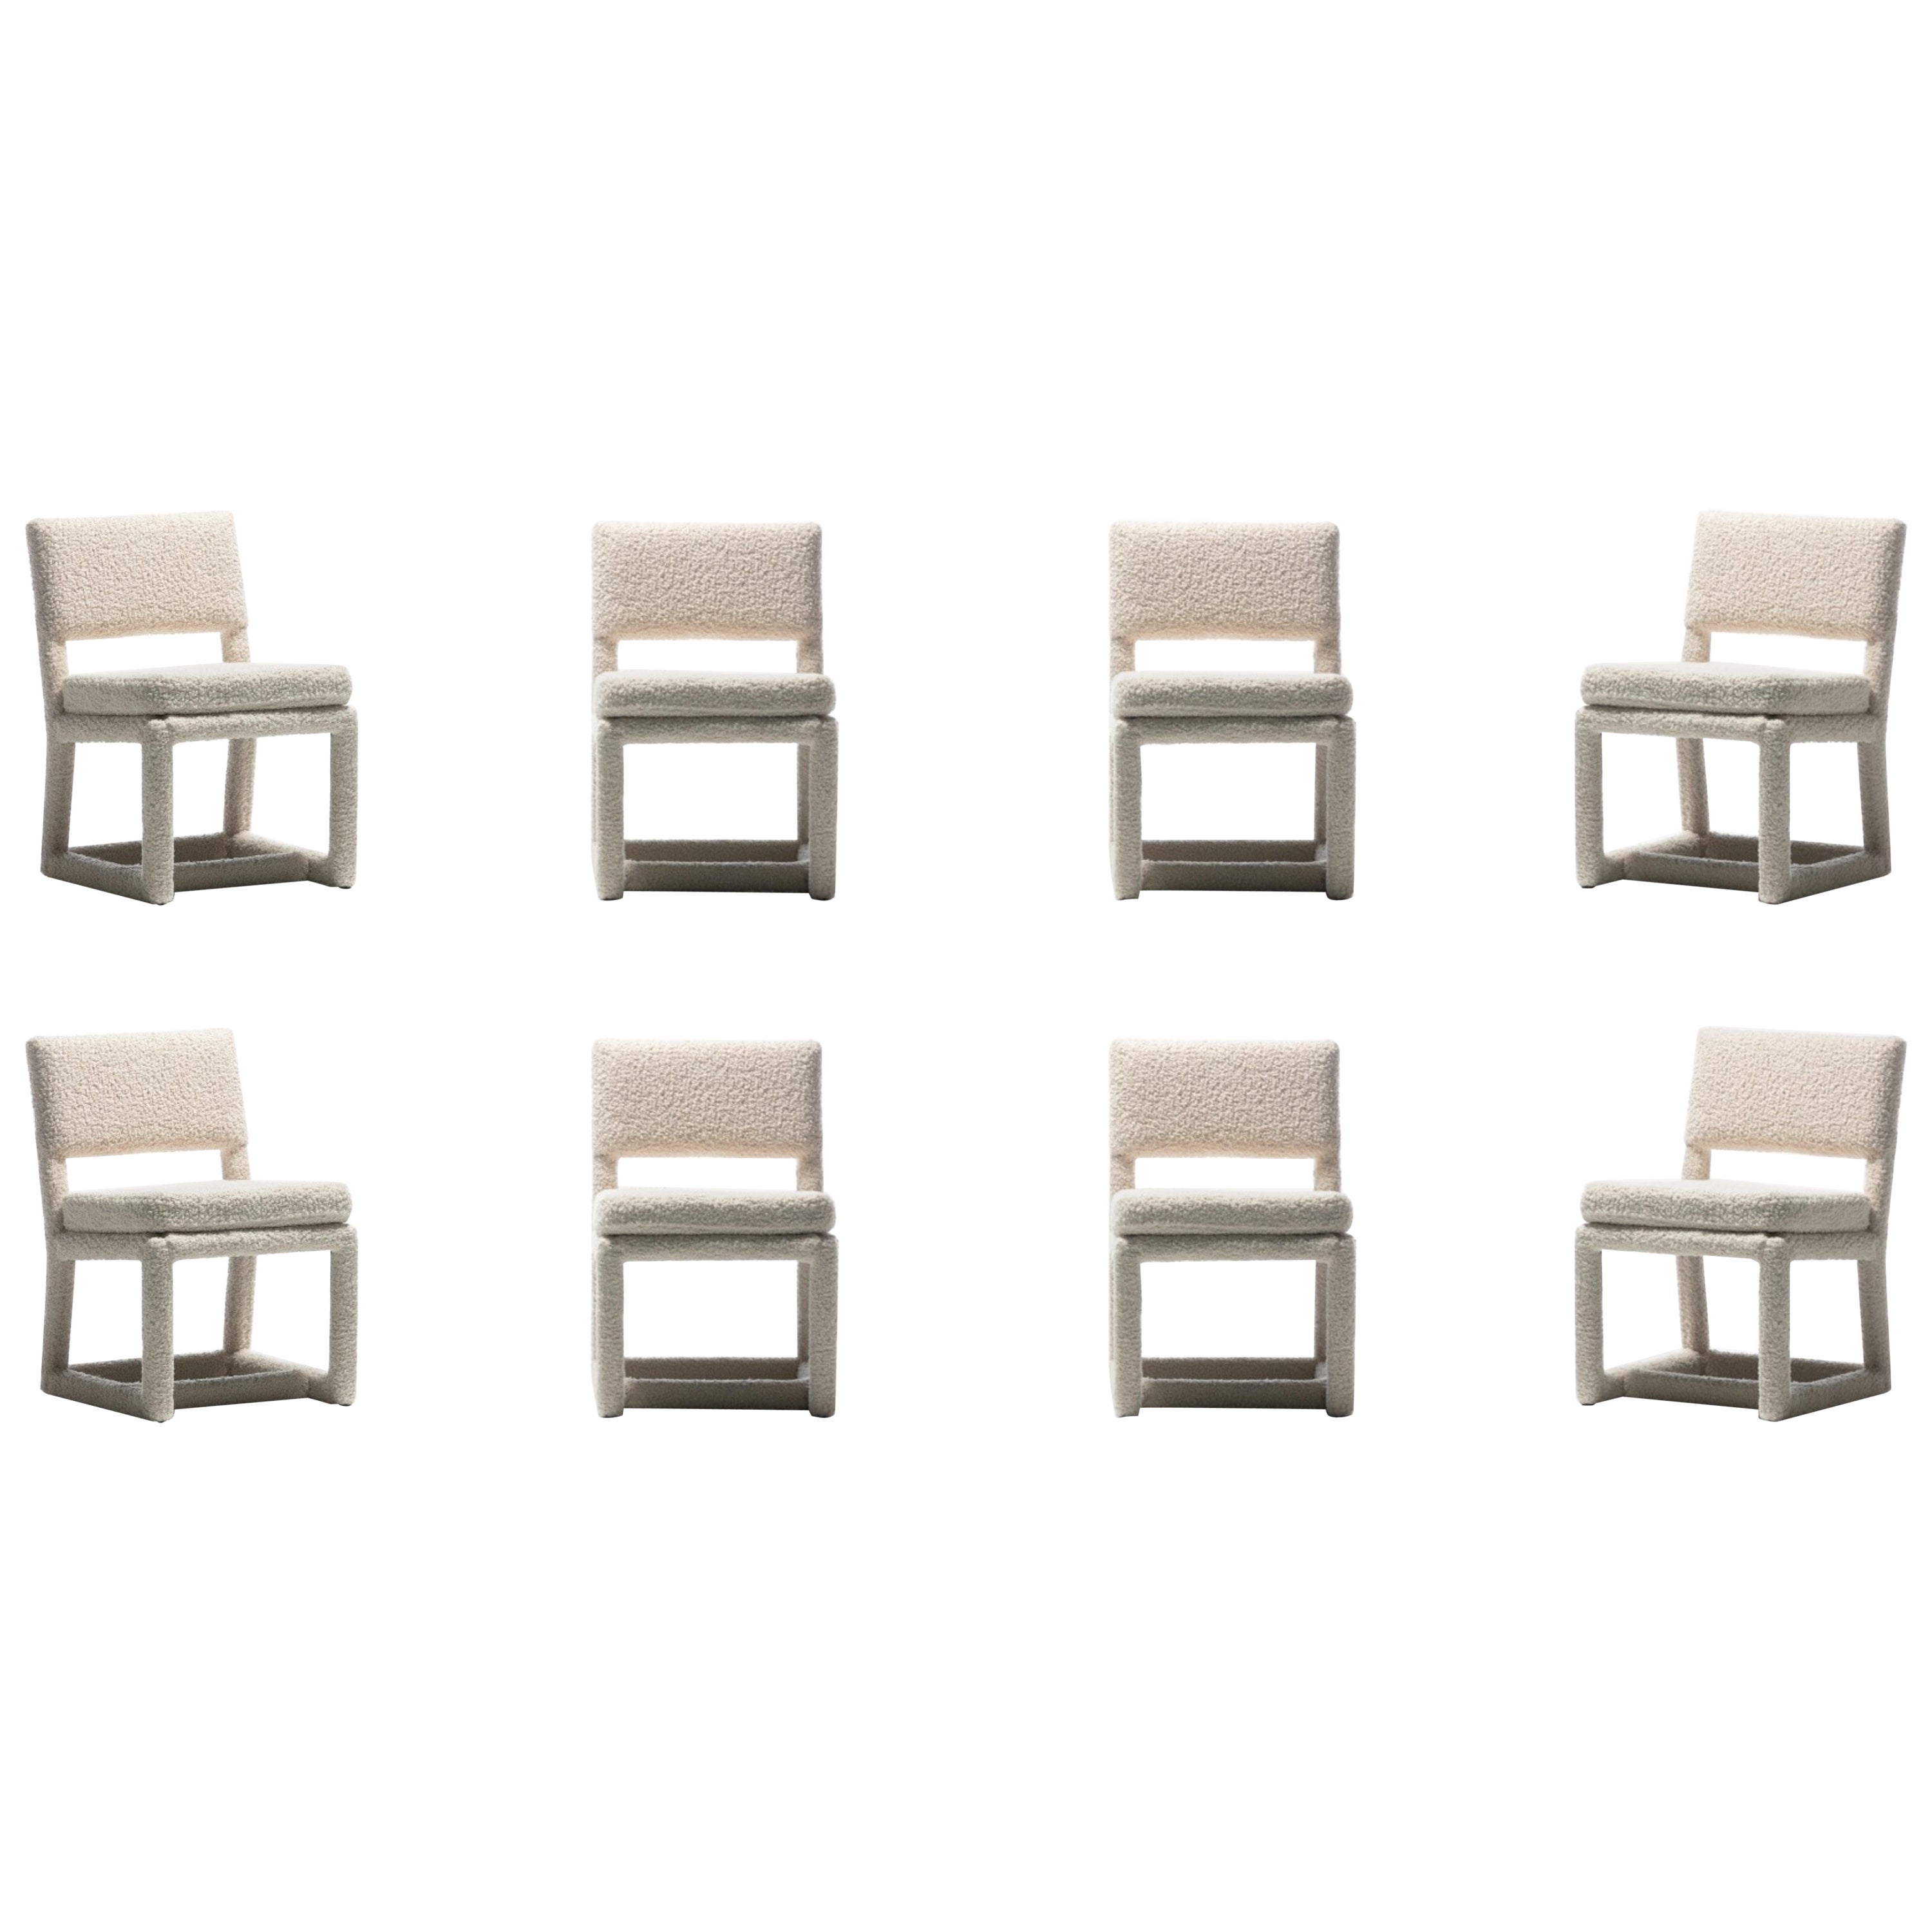 Milo Baughman Set of 8 Parsons Dining Chairs in Ivory Bouclé by Thayer Coggin